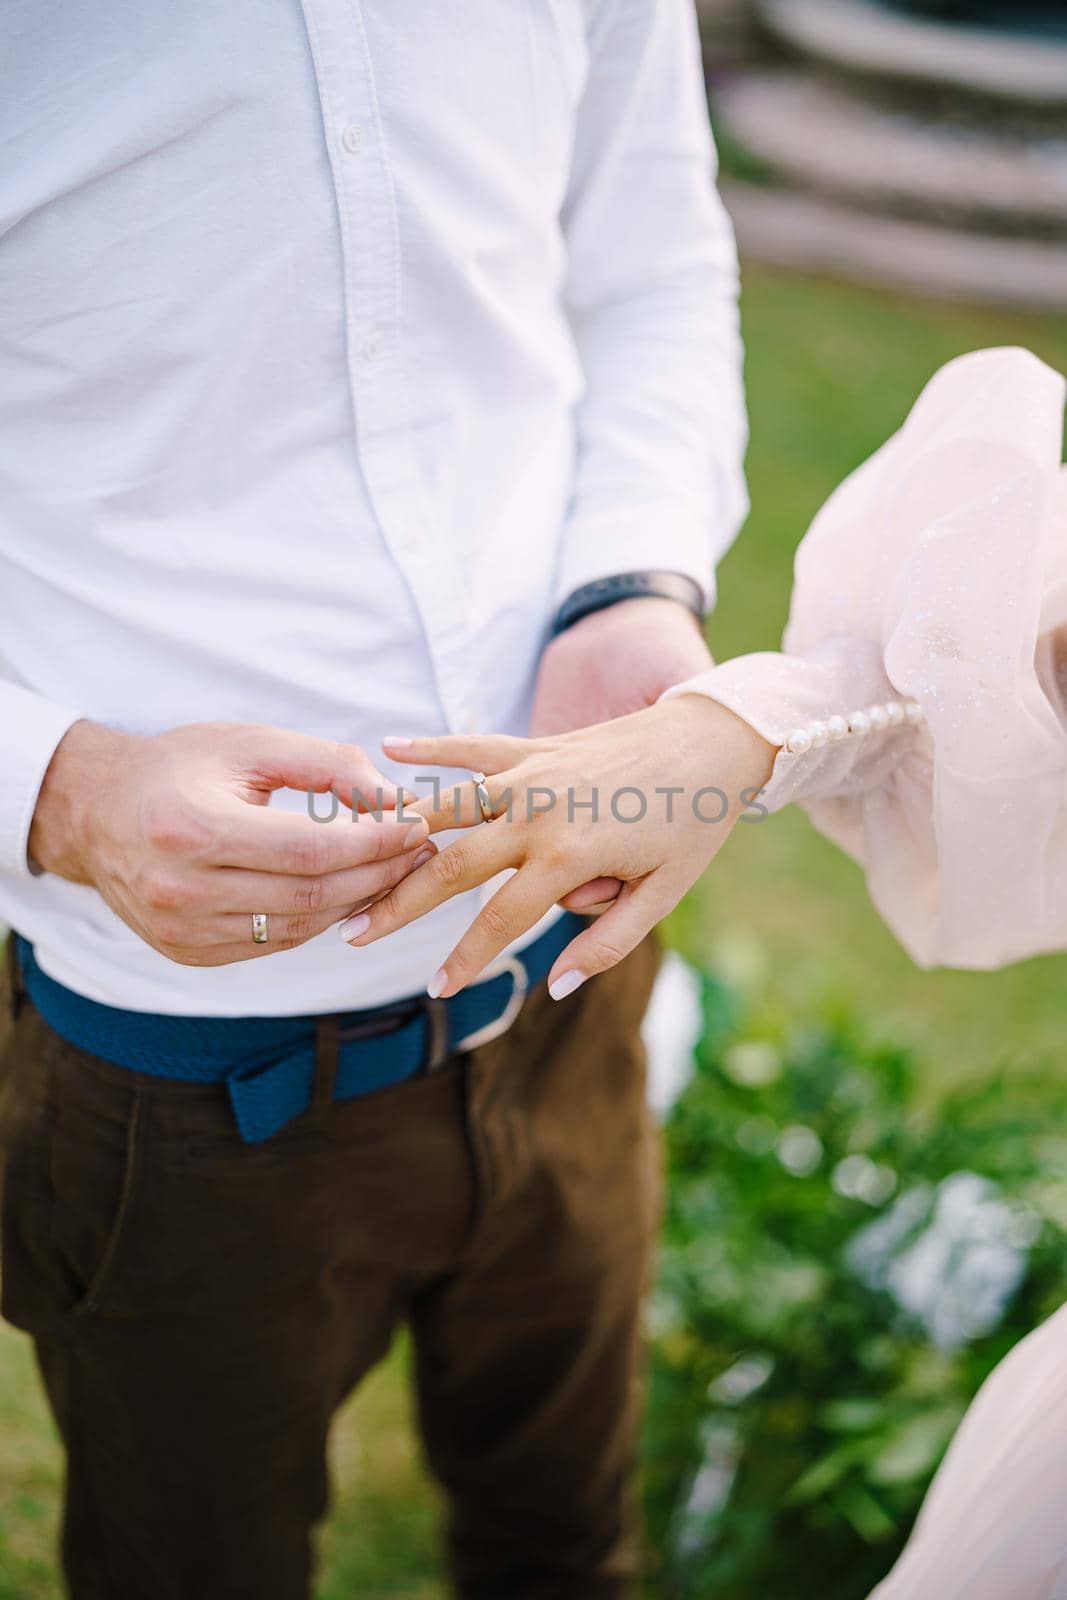 Wedding at an old winery villa in Tuscany, Italy. The groom puts a wedding ring on the brides finger, close-up of hands. by Nadtochiy